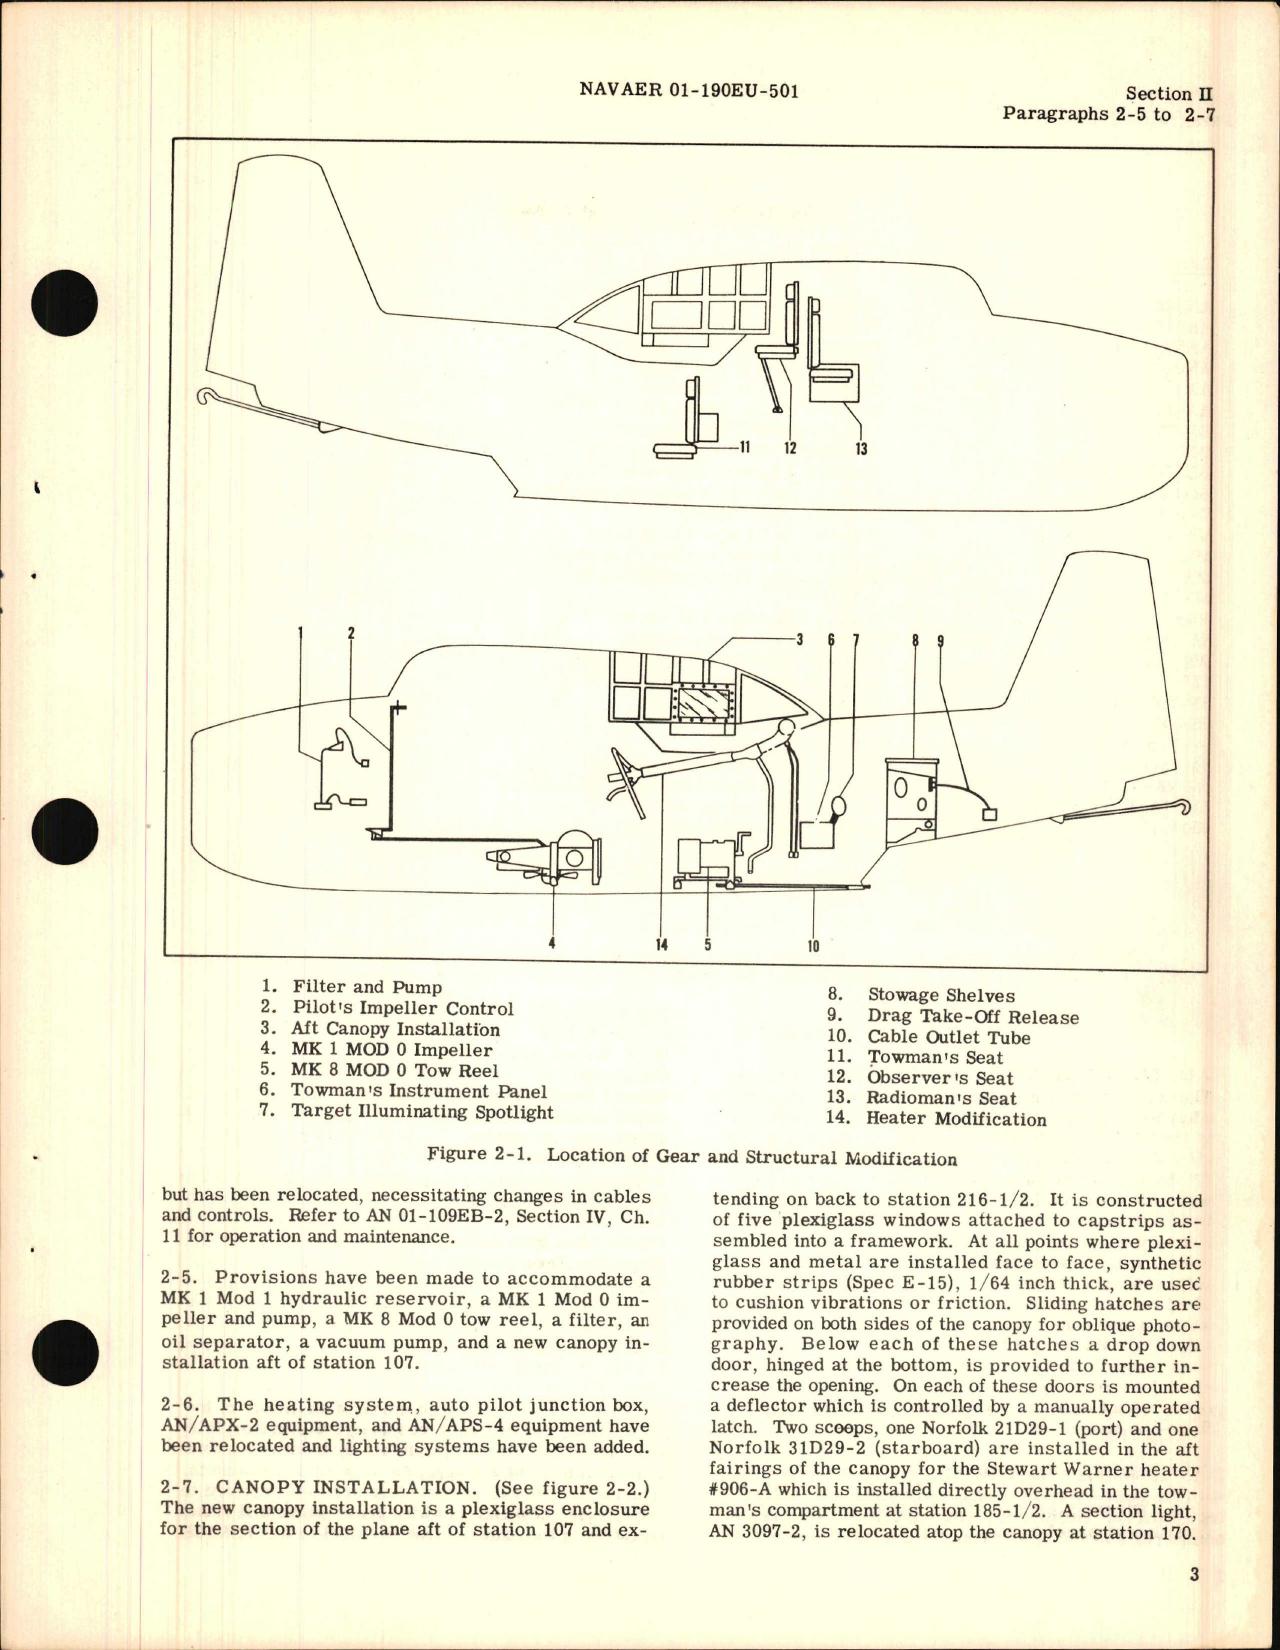 Sample page 7 from AirCorps Library document: Handbook of Instructions with Parts Catalog for TBM-3U